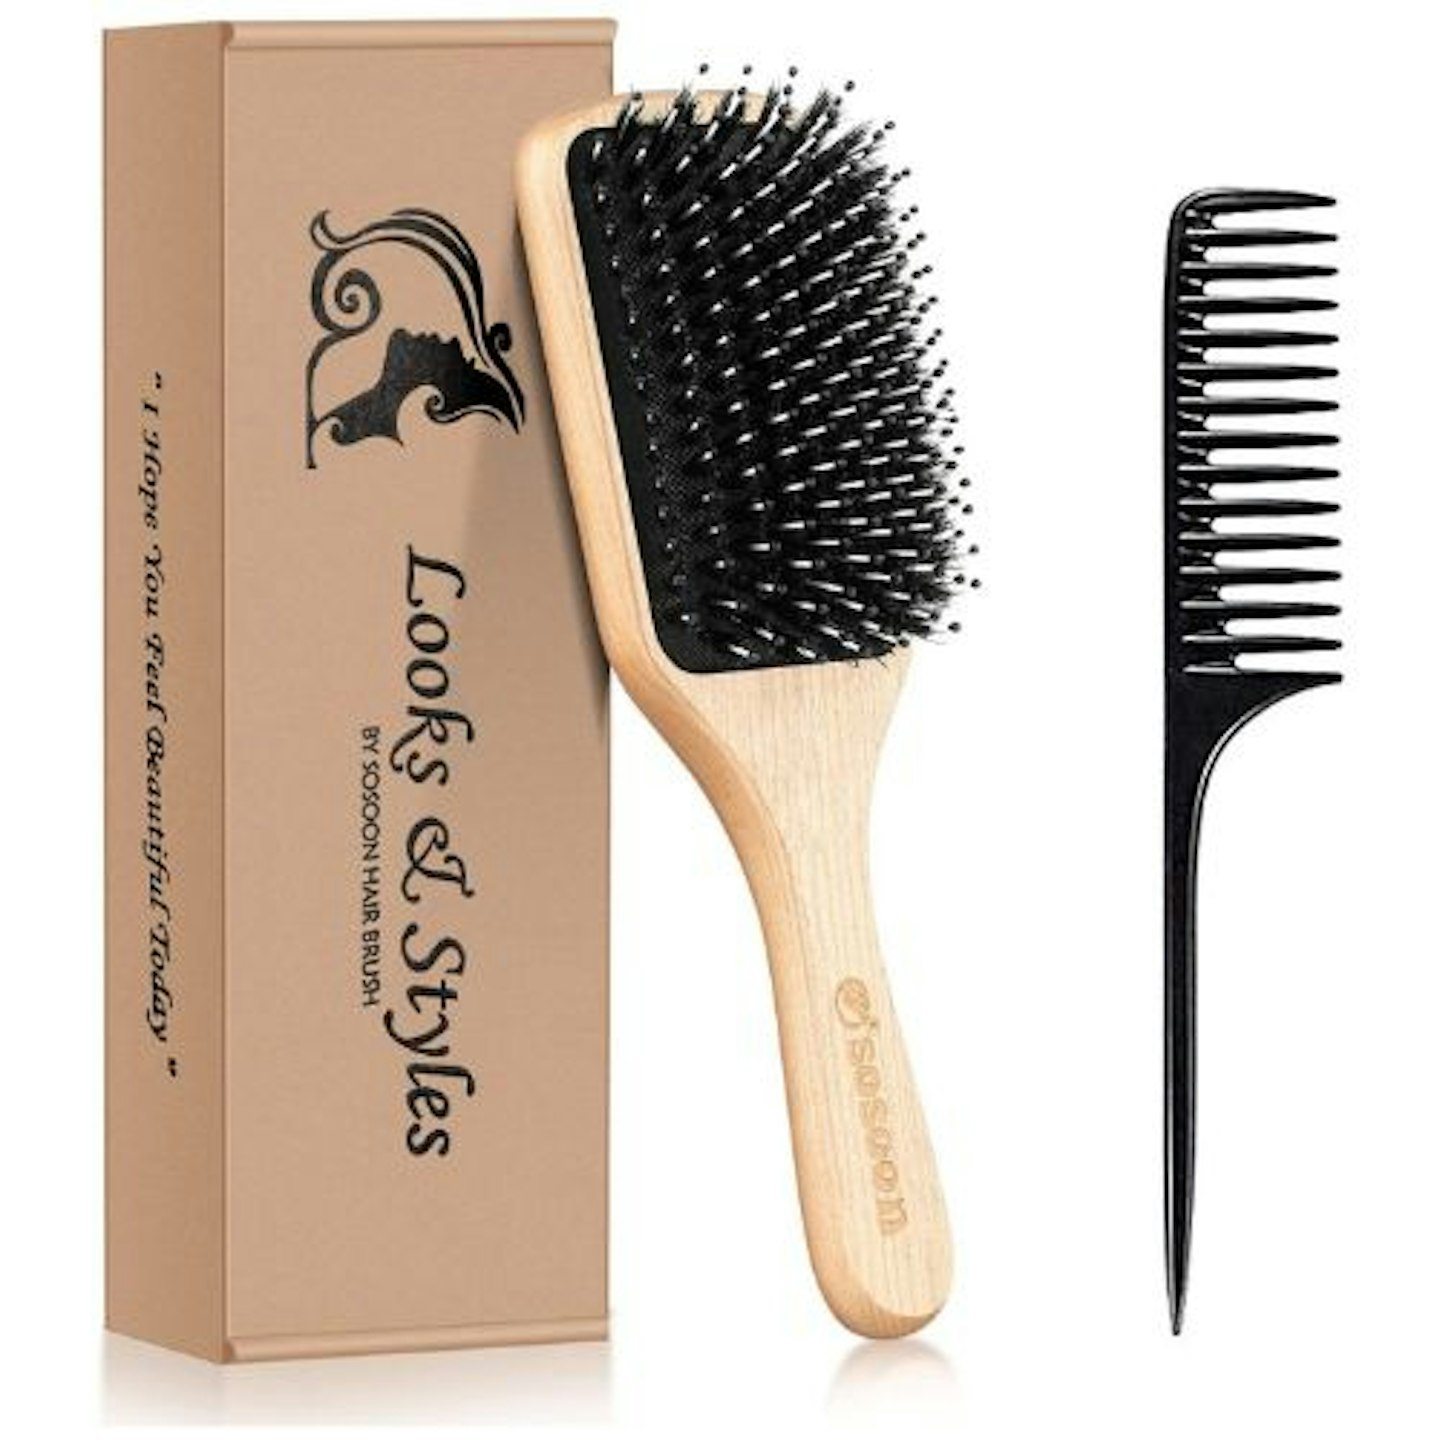 Sosoon Boar Bristle Paddle Hairbrush for Long Thick Curly Wavy Dry or Damaged Hair